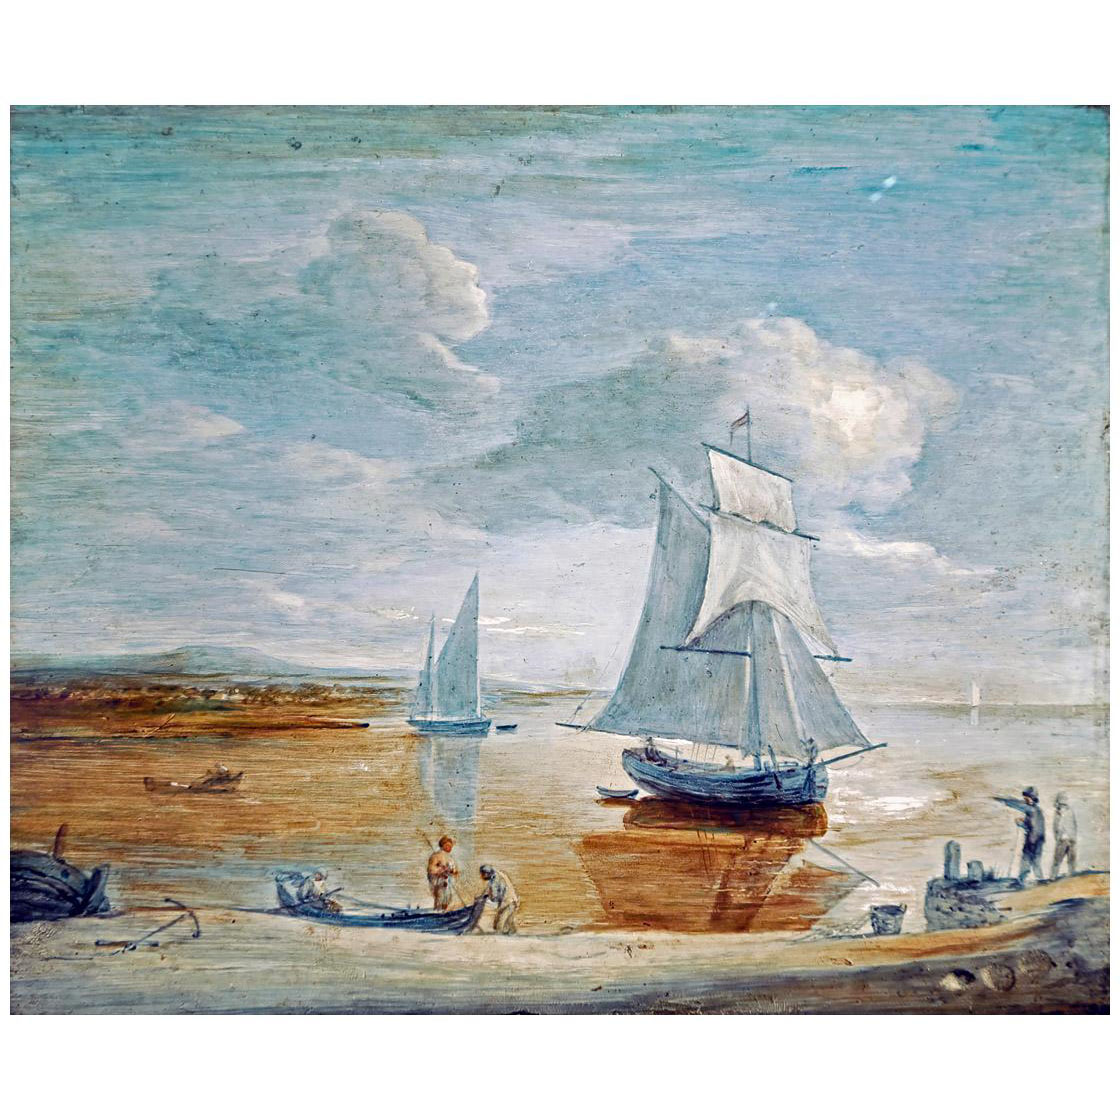 Thomas Gainsborough. Sailing Boats. 1781-1782. Oil on glass. Victoria and Albert Museum